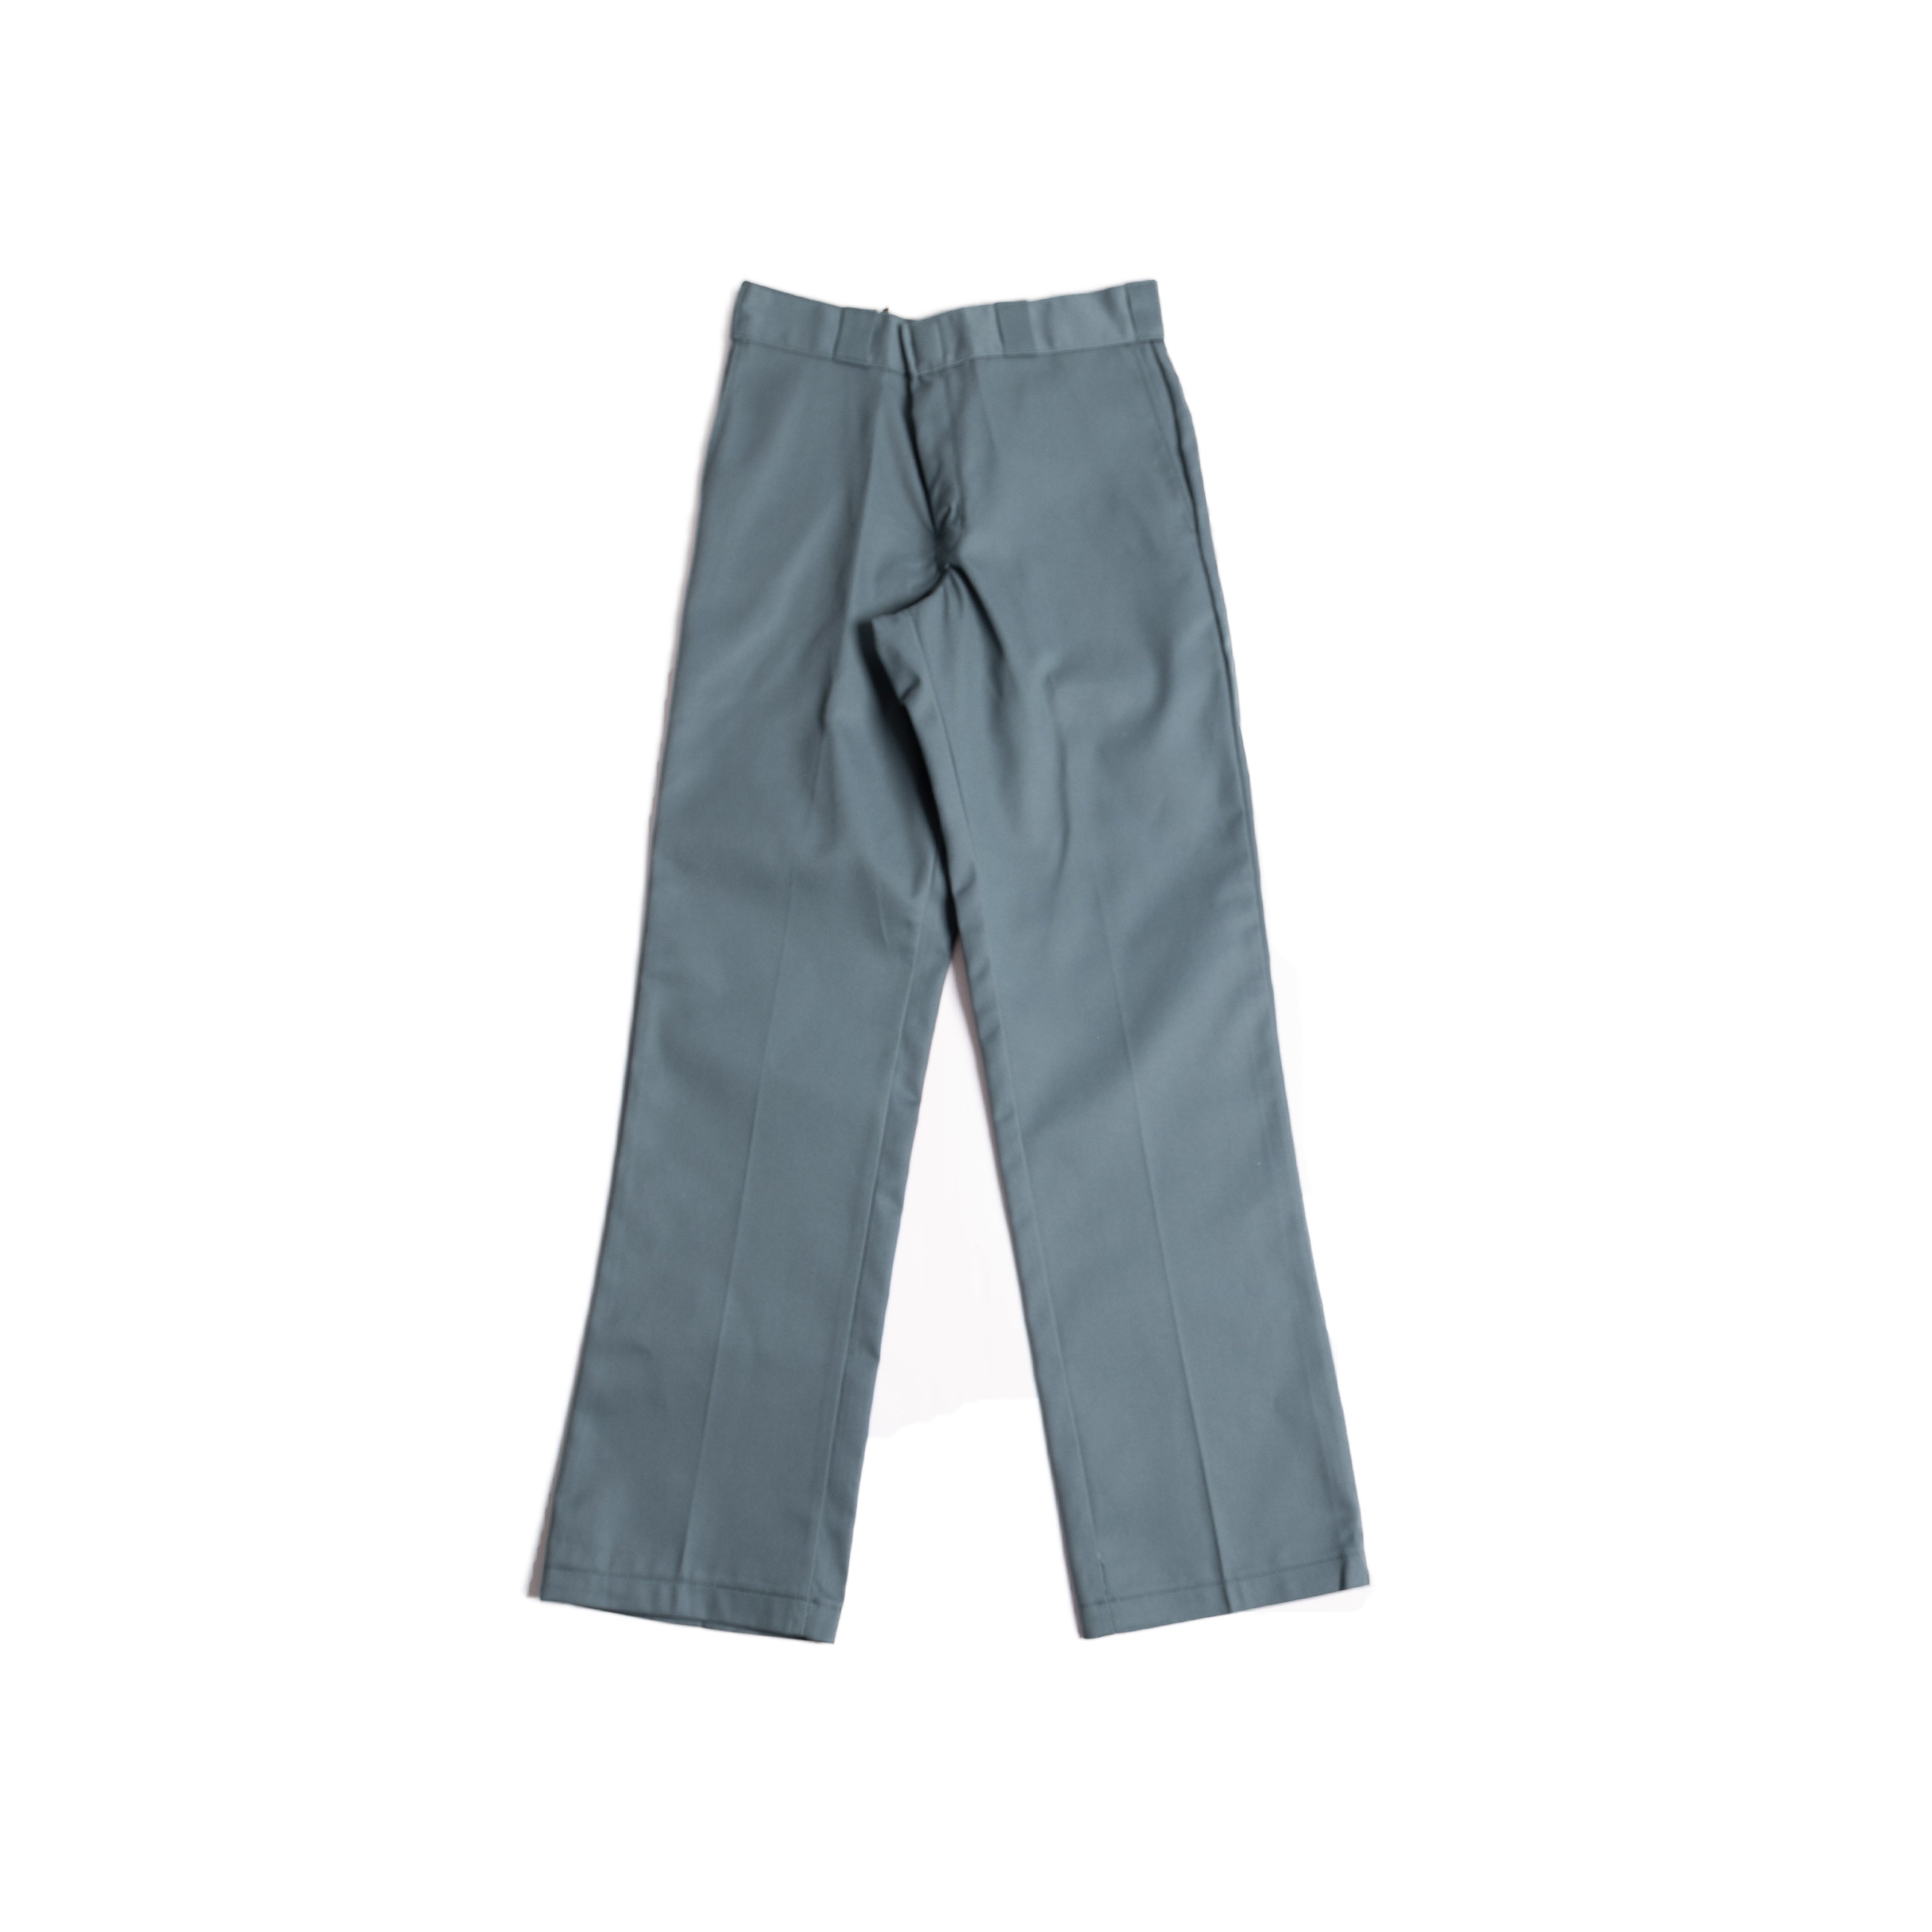 Dickies 874 Original Work Pant (Relaxed) - Lincoln Green